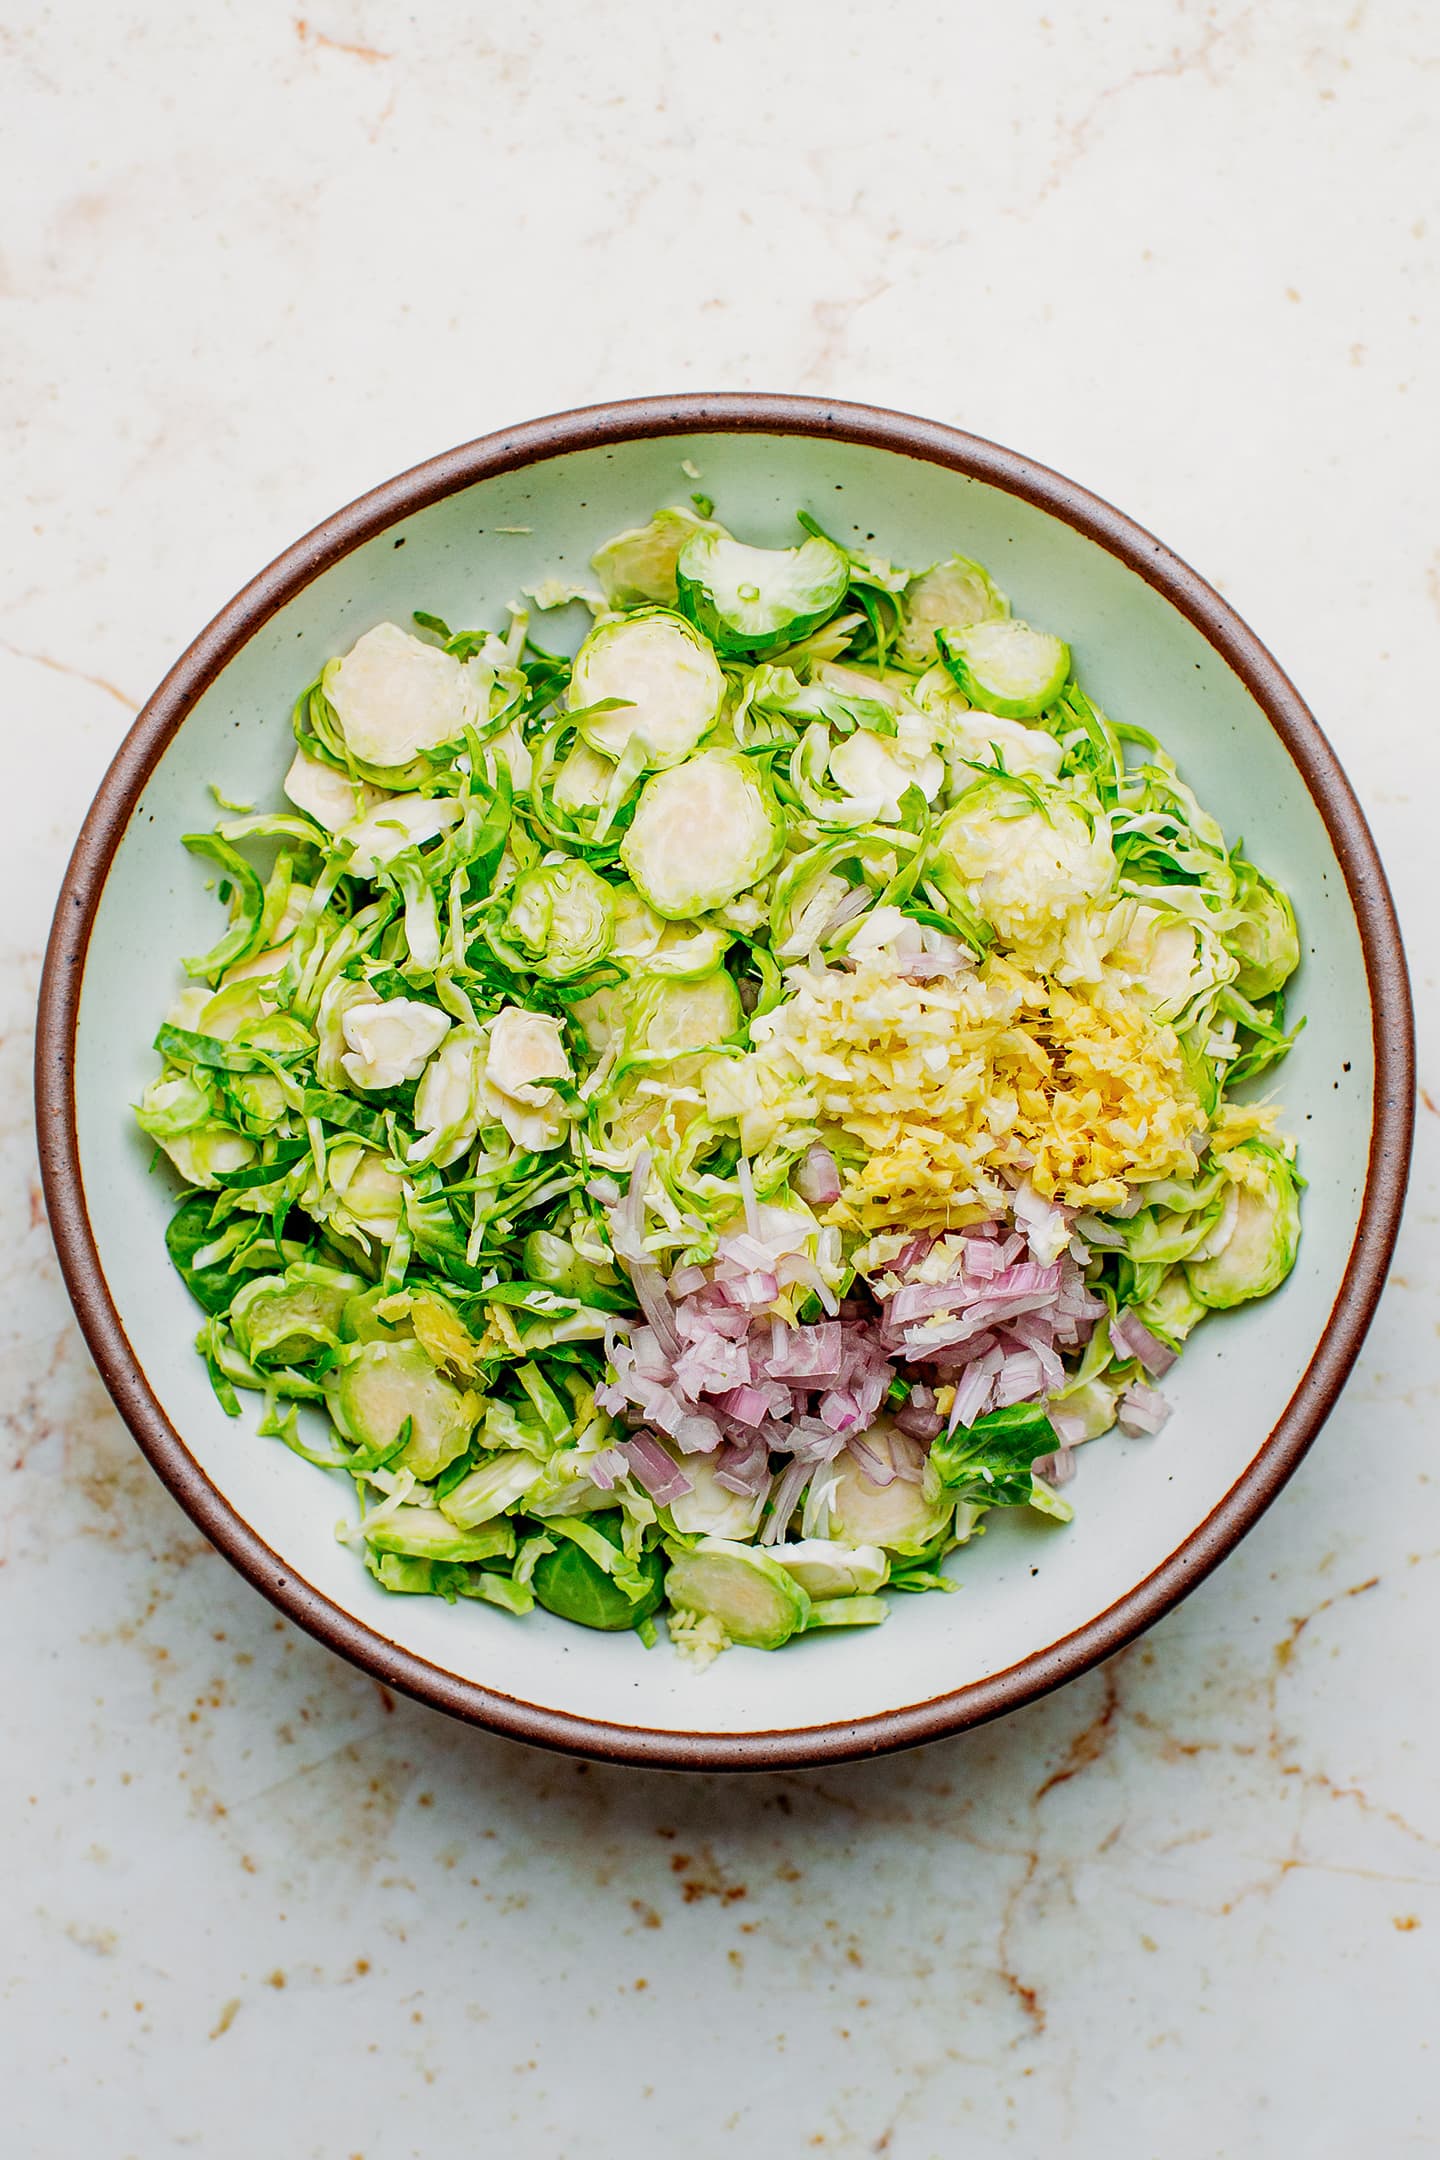 Shaved Brussels sprouts, ginger, shallots, and garlic in a bowl.